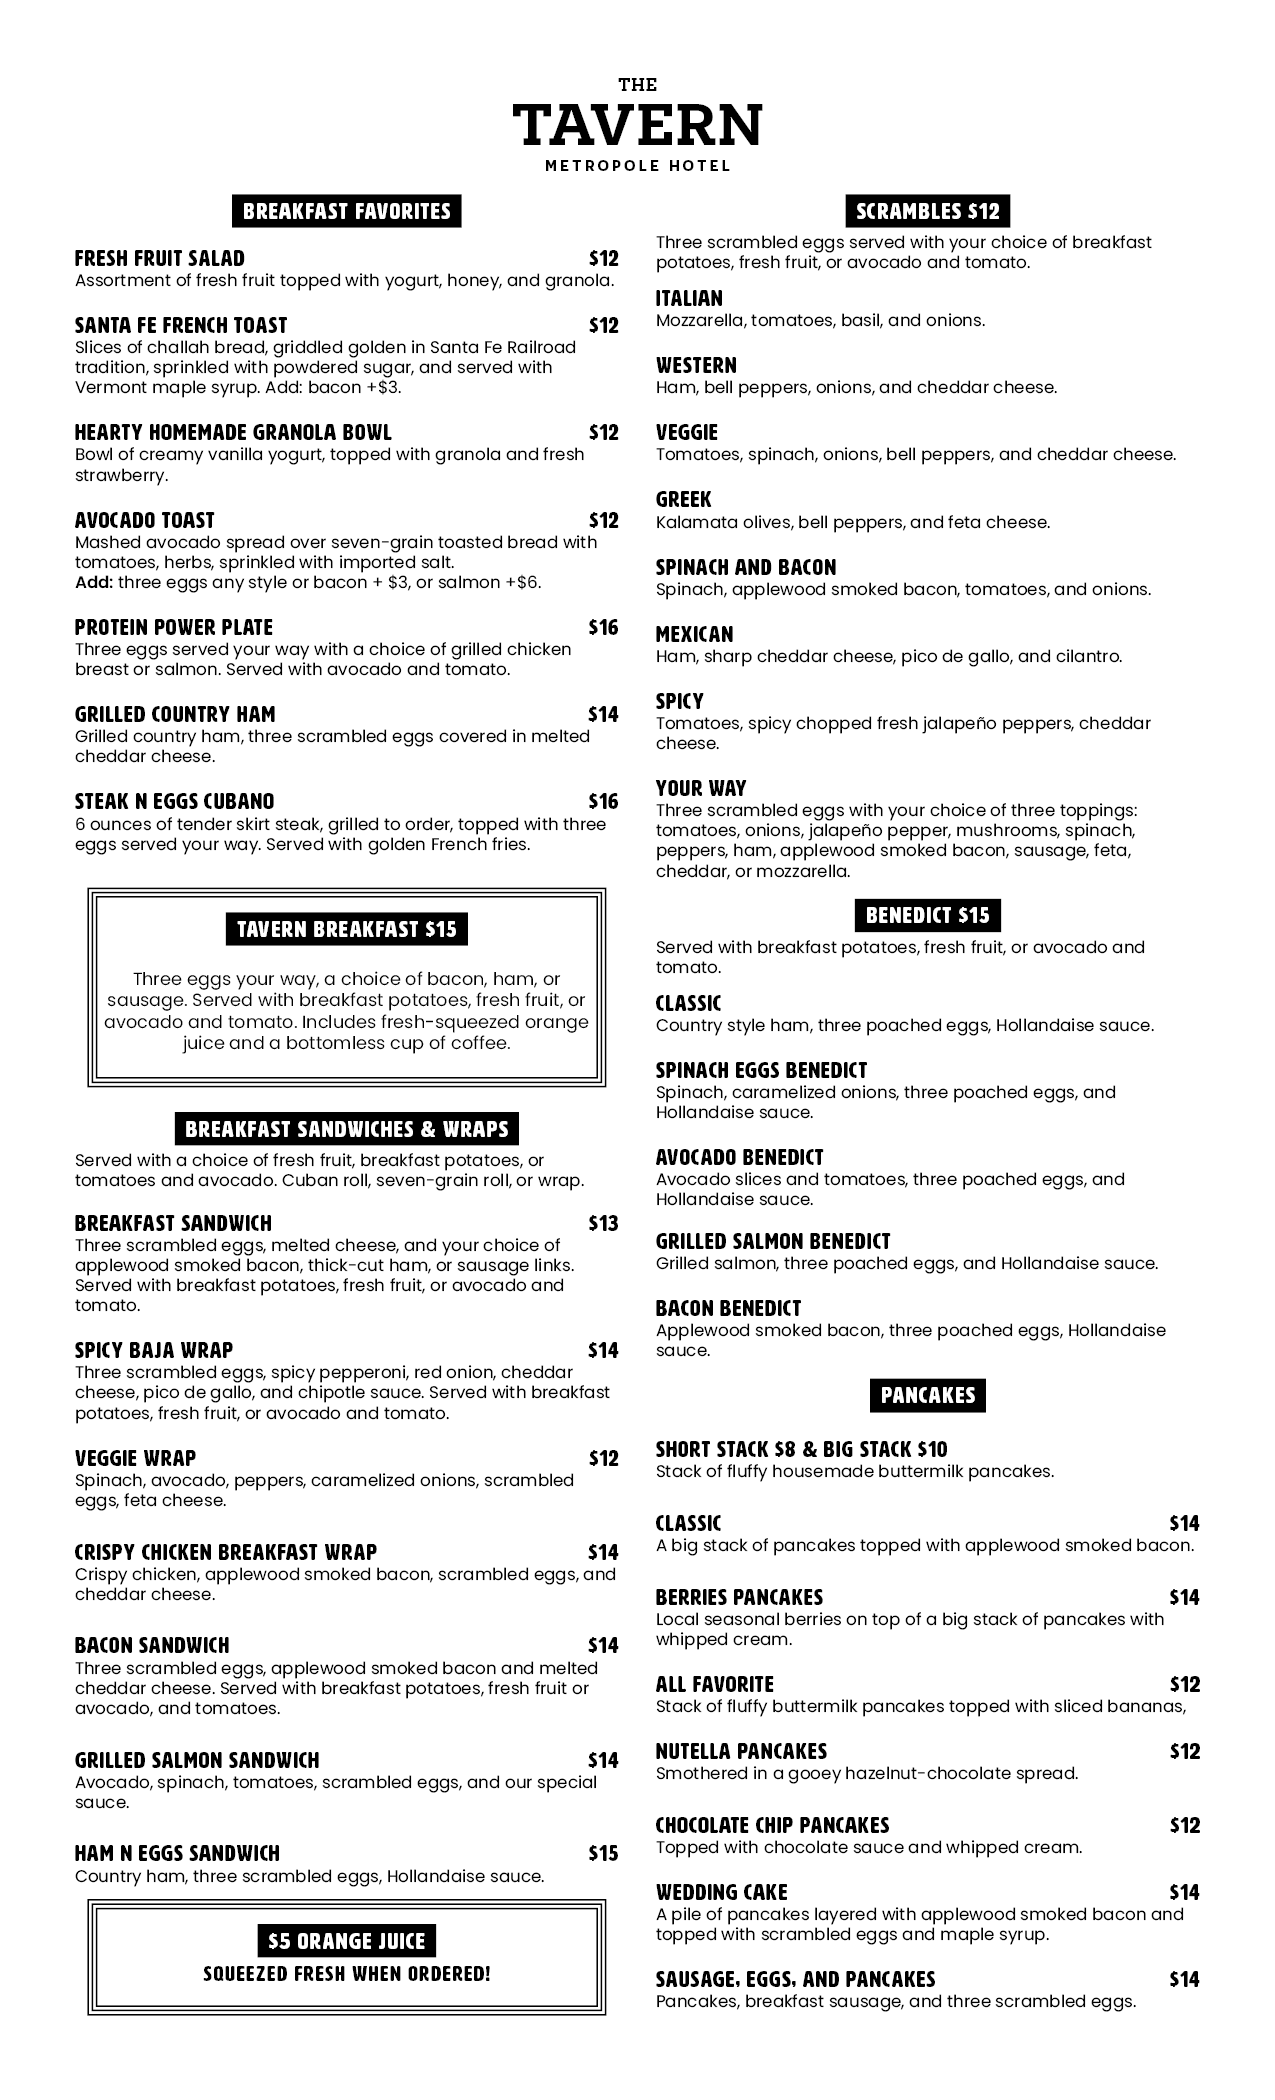 The Tavern menu - page 2 of breakfast items 